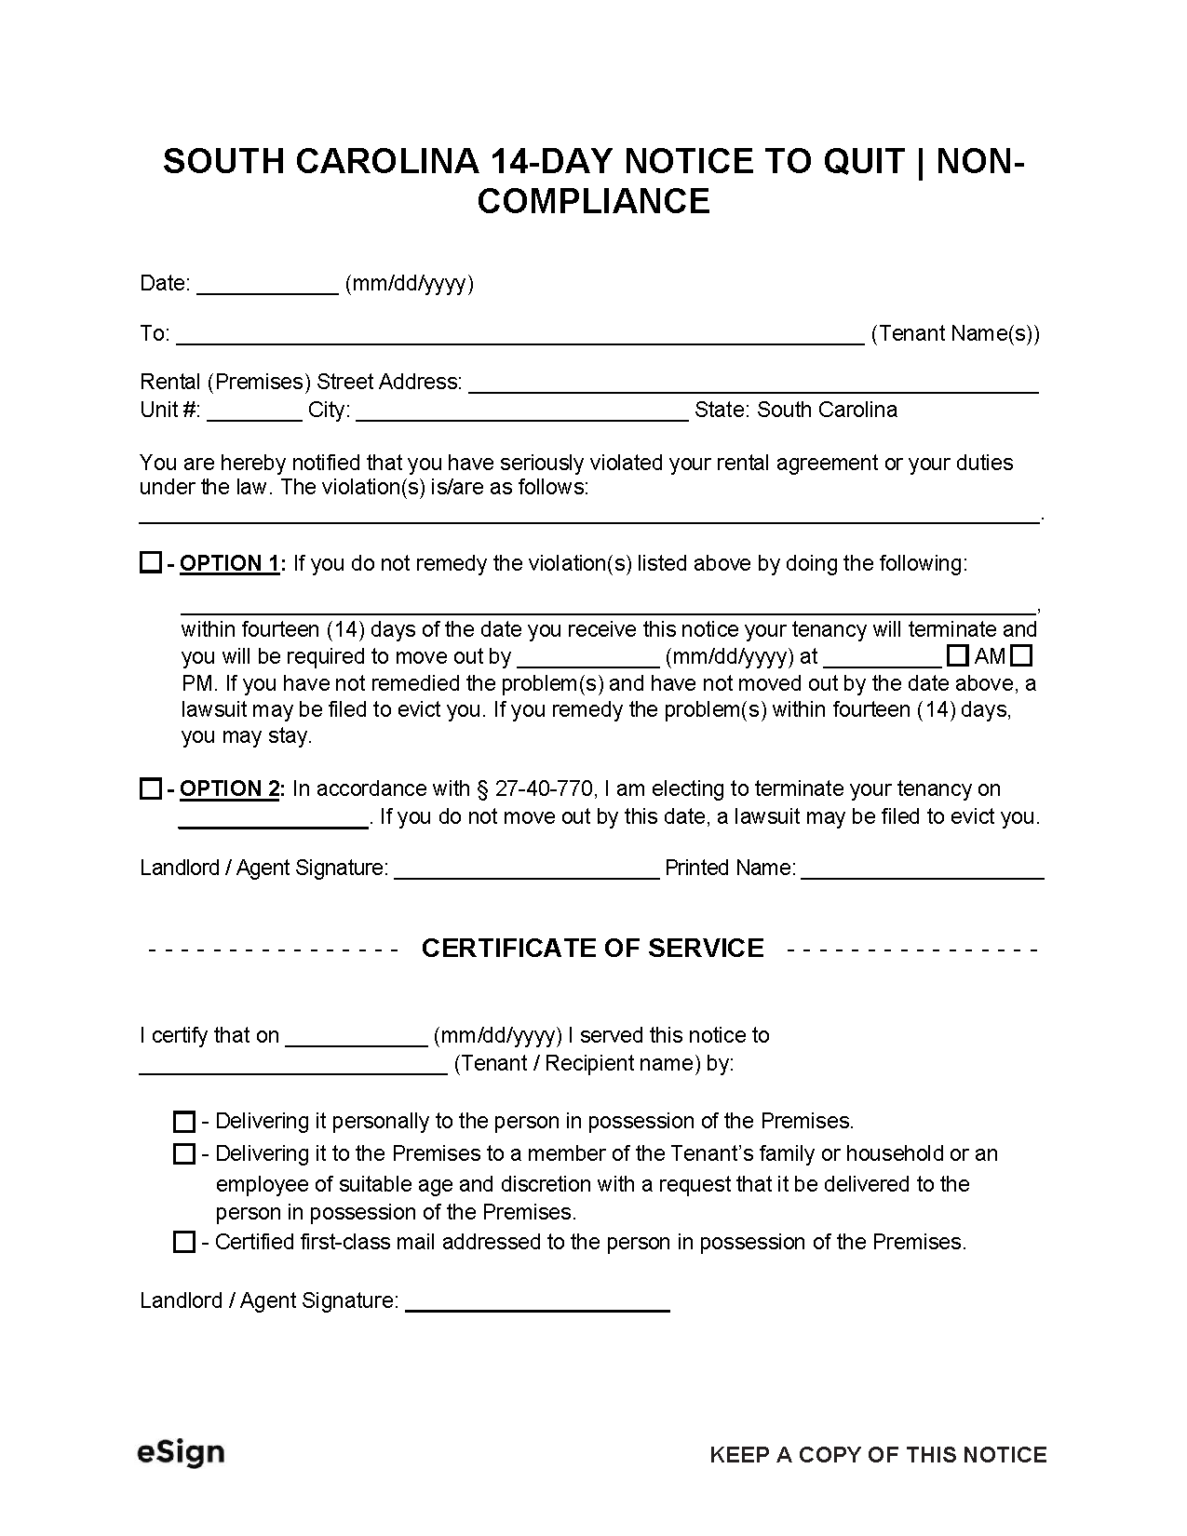 Free South Carolina Day Notice To Quit Non Compliance Pdf Word